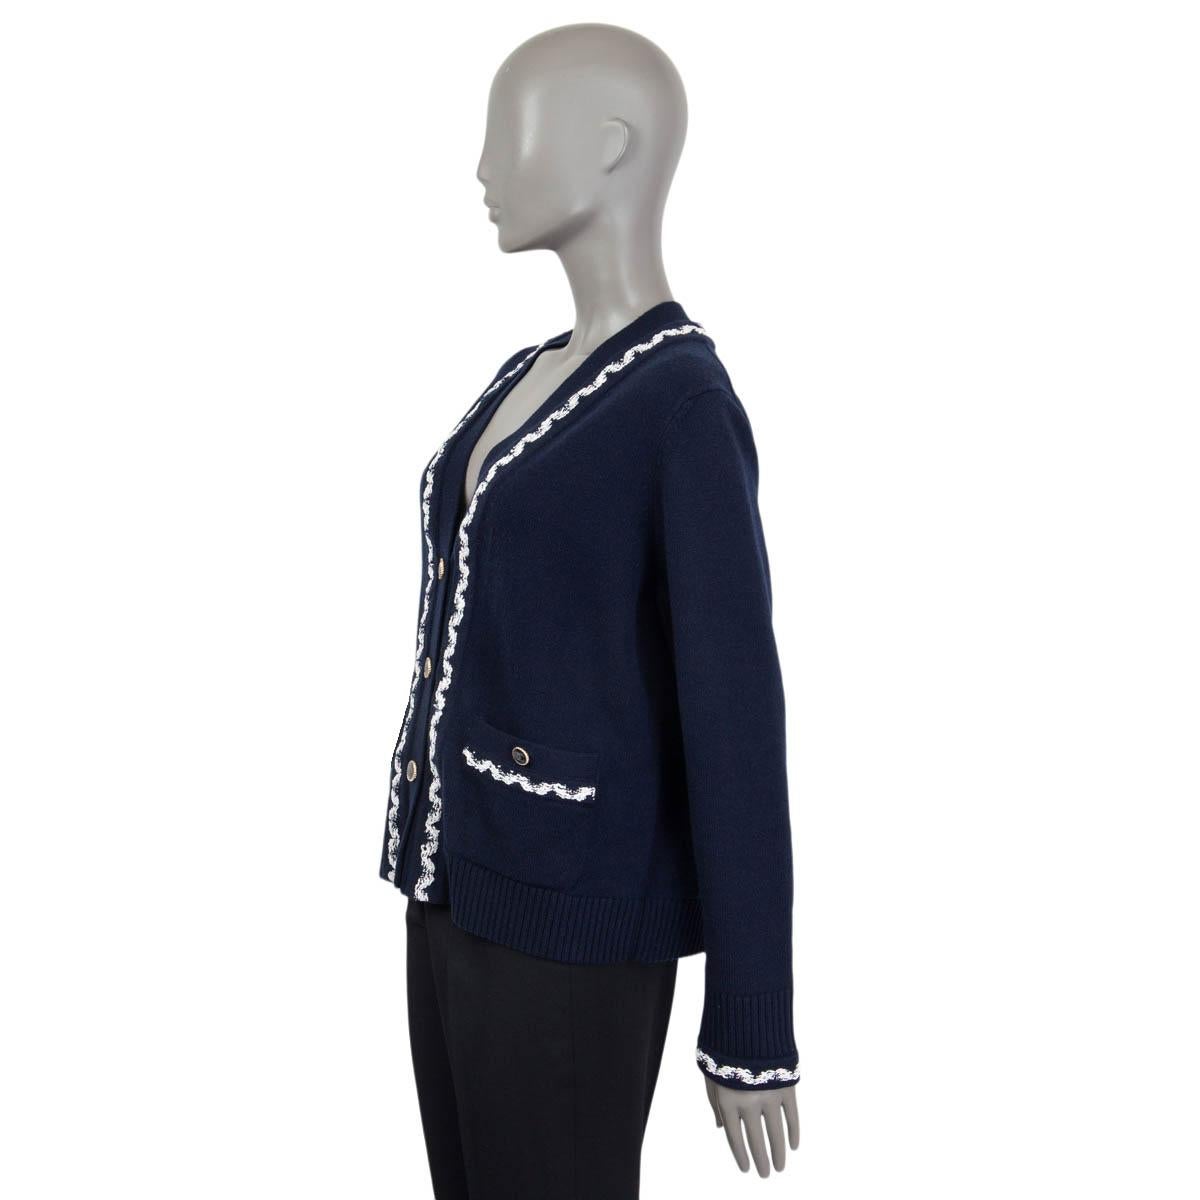 100% authentic Chanel Pre Spring 2021 knit cardigan in navy blue and white cashmere (100%). Features two 'CC' buttoned patch pockets on the front. Opens with four 'CC' buttons on the front. Unlined. Brand new, with